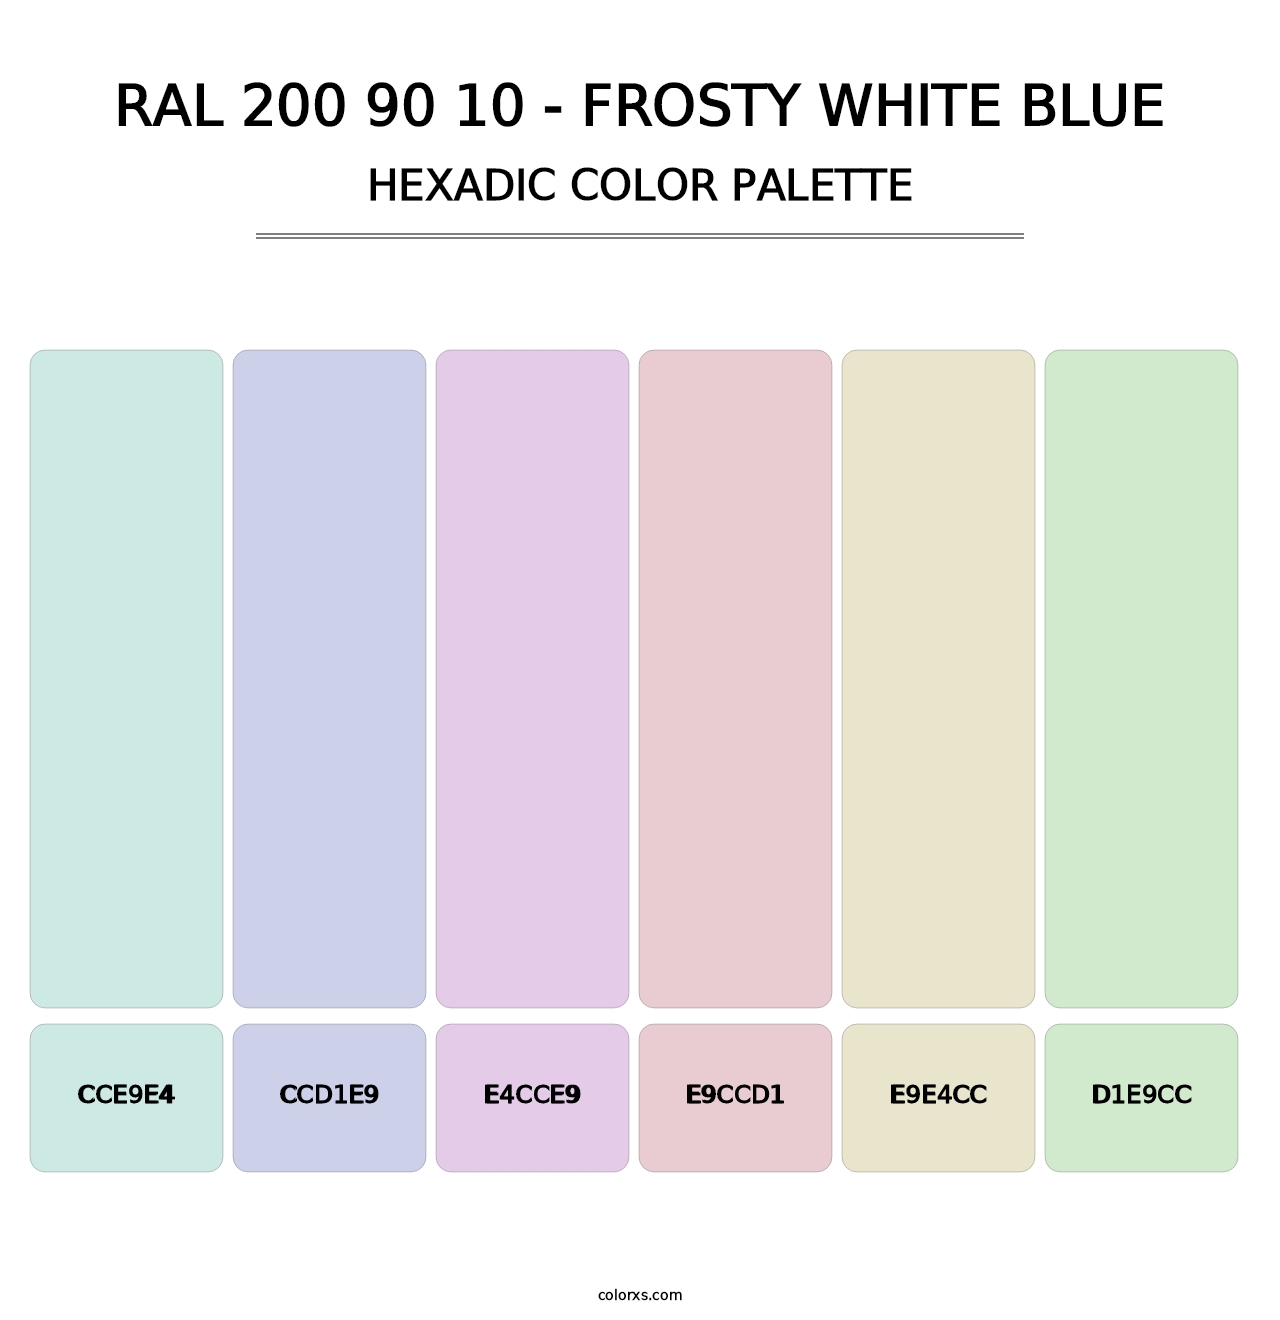 RAL 200 90 10 - Frosty White Blue - Hexadic Color Palette